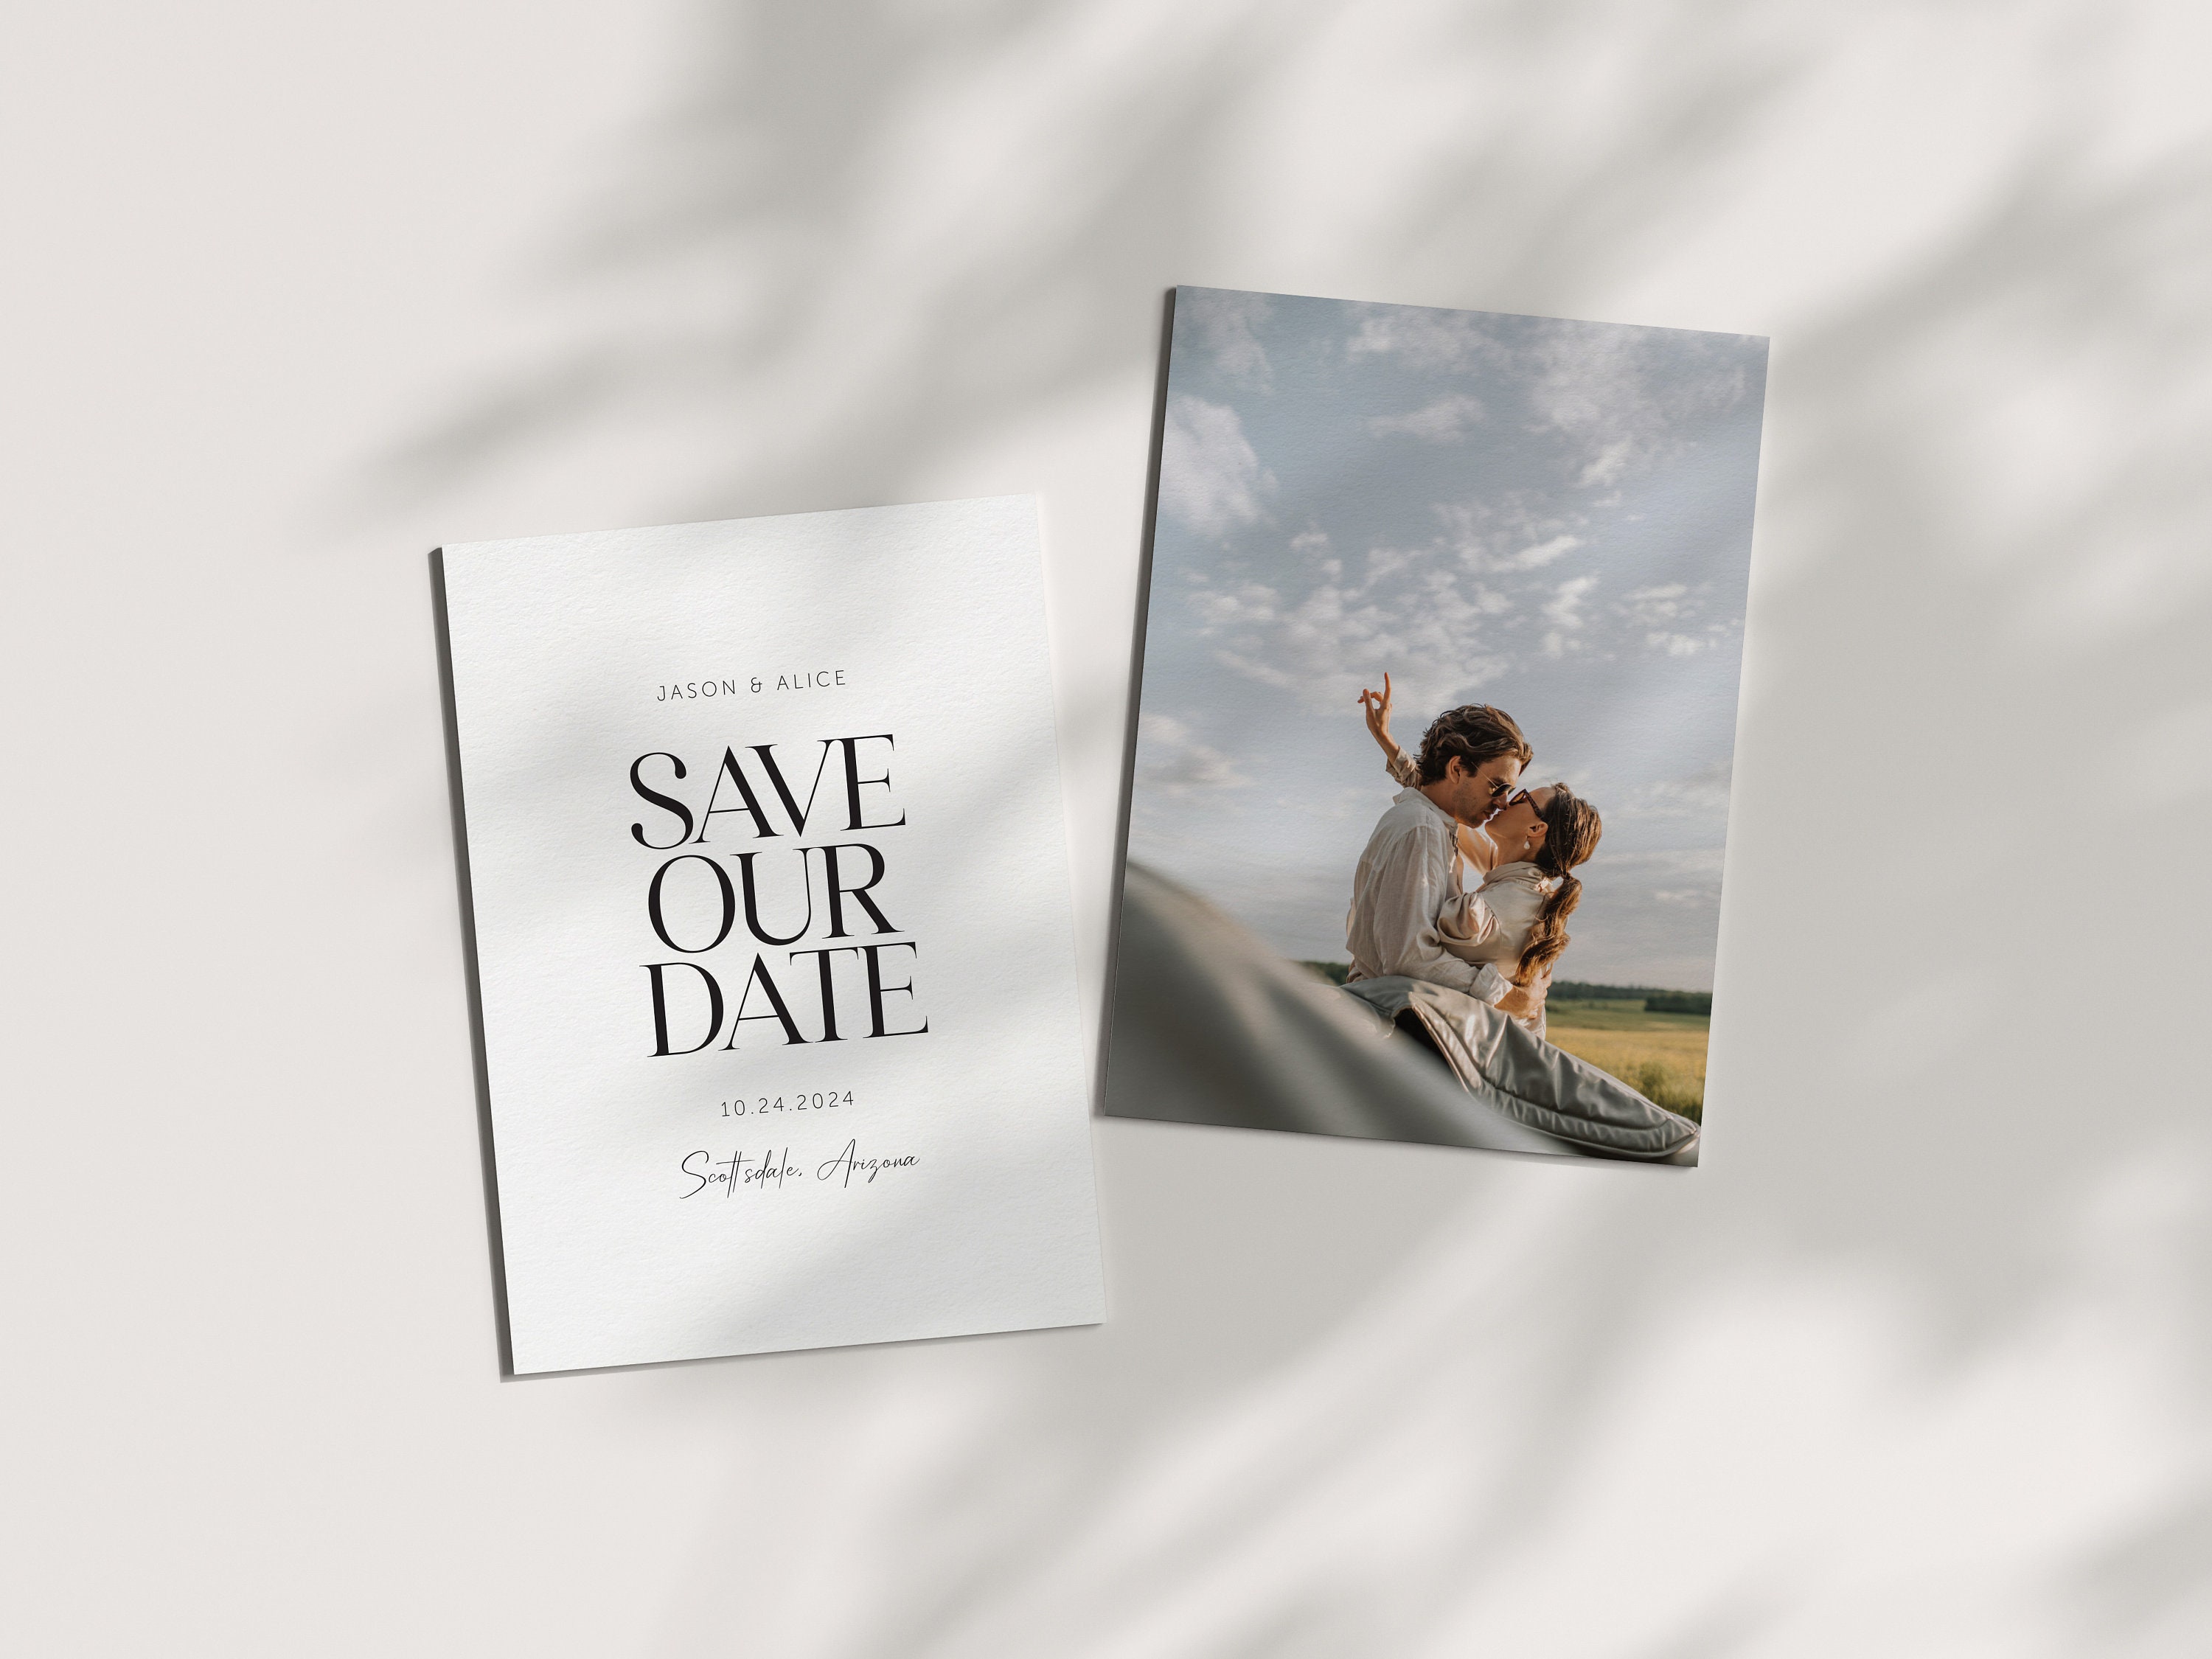 Delicate Wedding Save the Date Cards